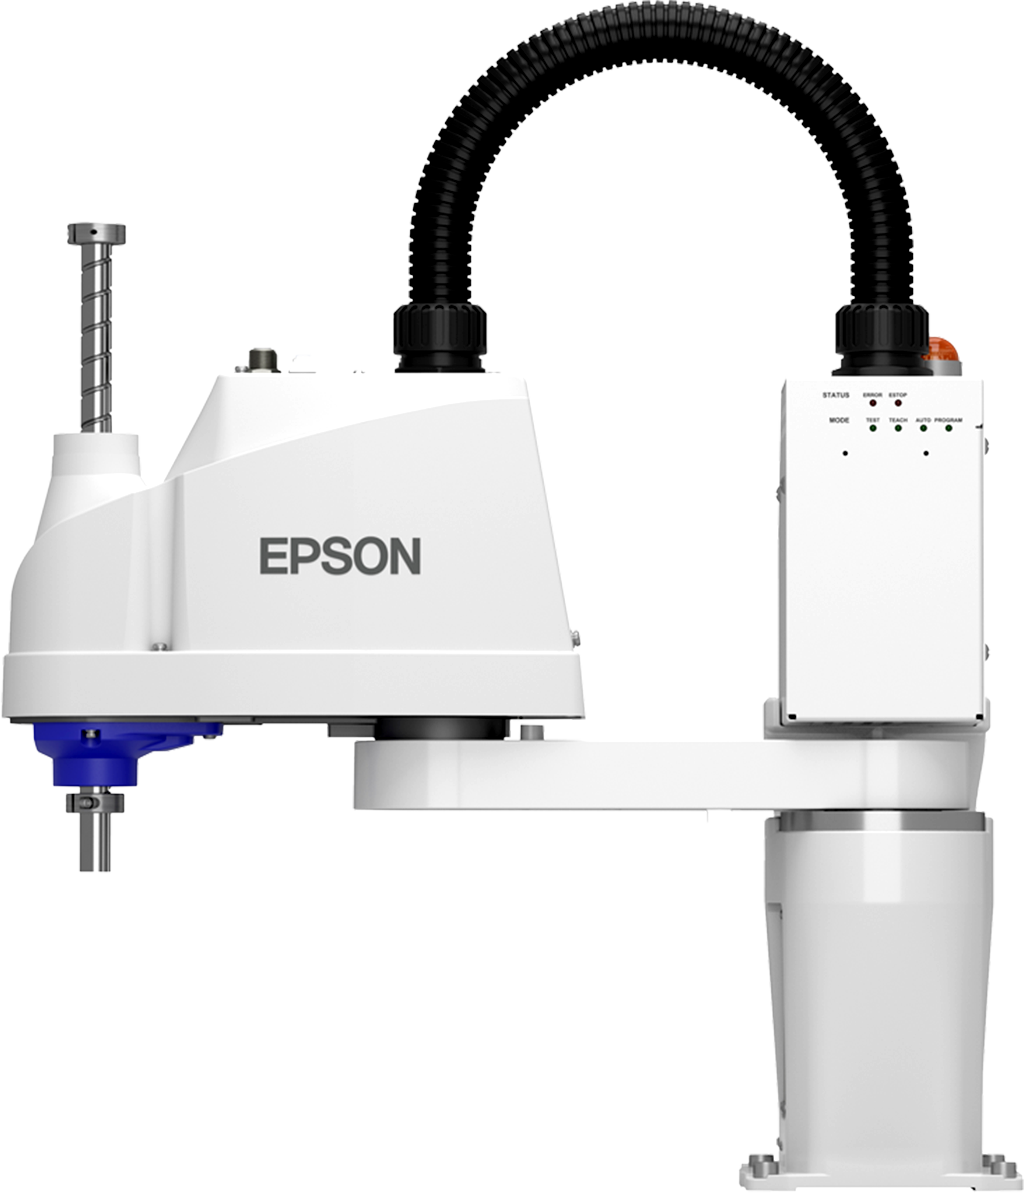 epson robot software download